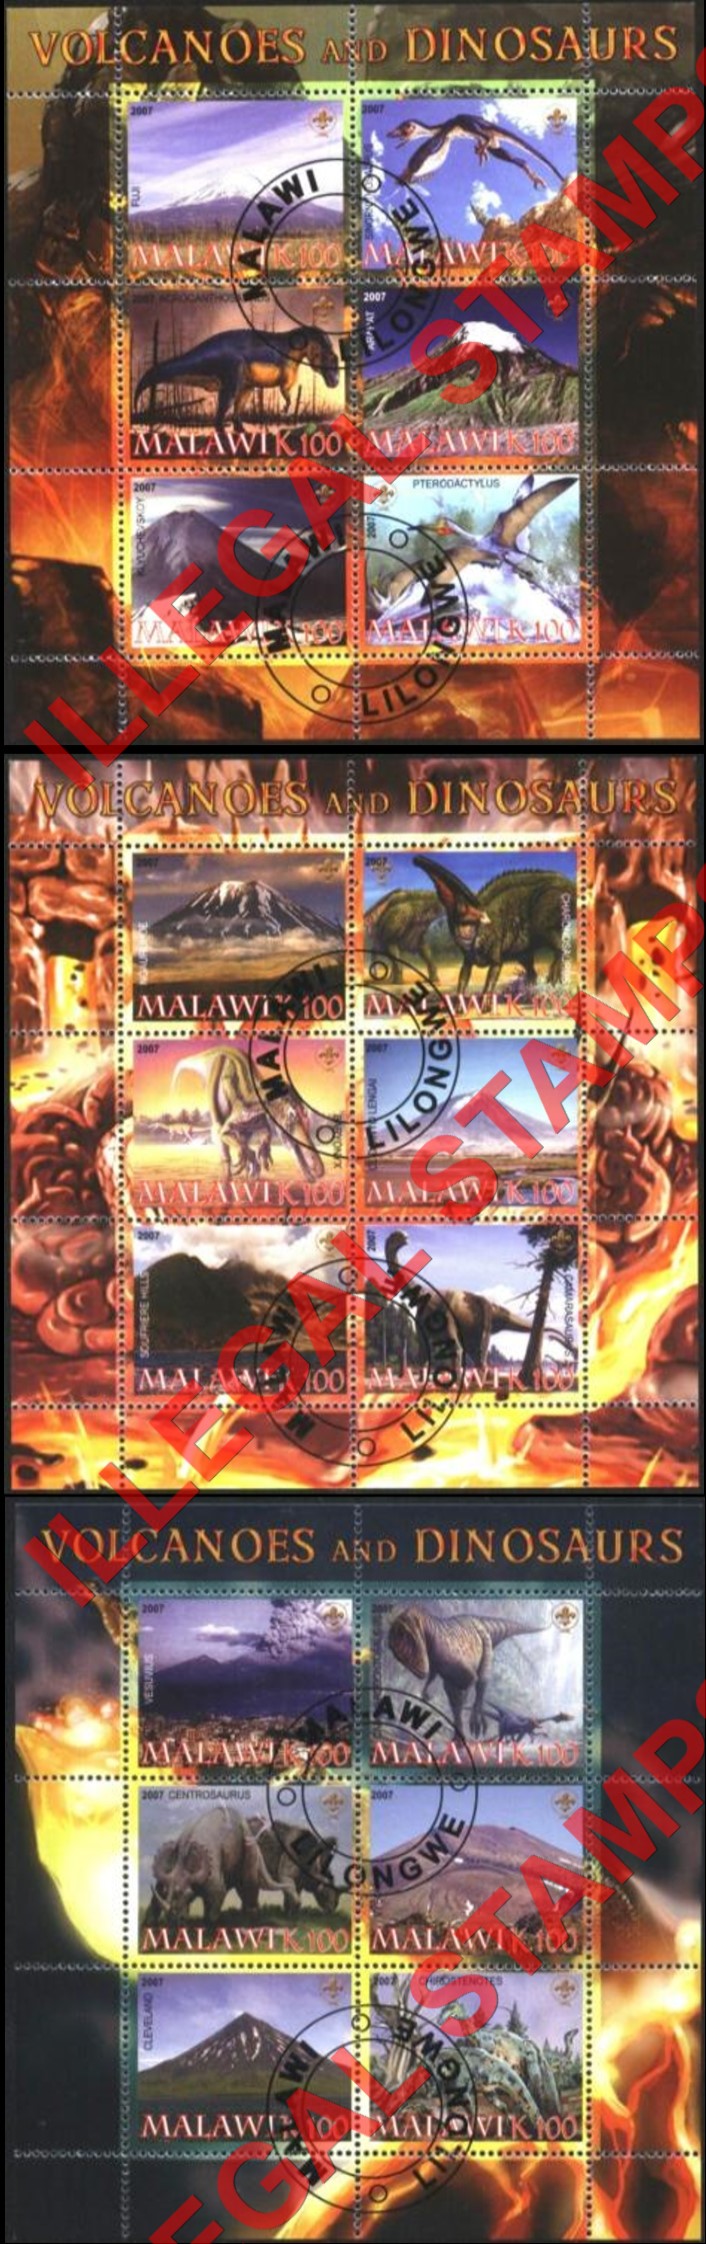 Malawi 2007 Volcanoes and Dinosaurs Illegal Stamp Souvenir Sheets of 6